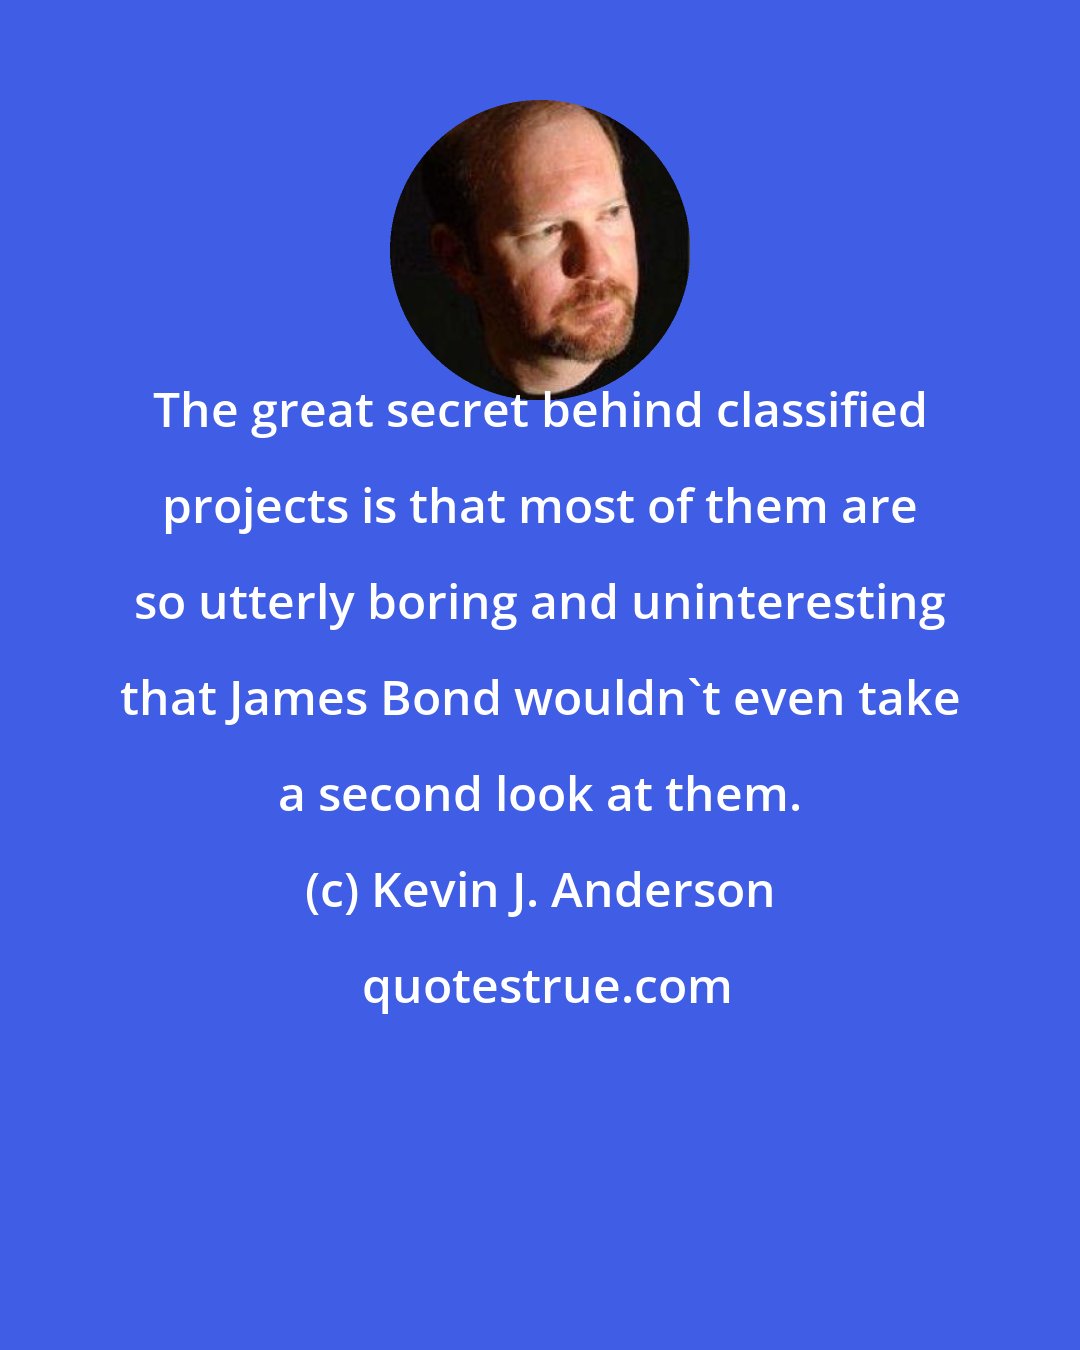 Kevin J. Anderson: The great secret behind classified projects is that most of them are so utterly boring and uninteresting that James Bond wouldn't even take a second look at them.